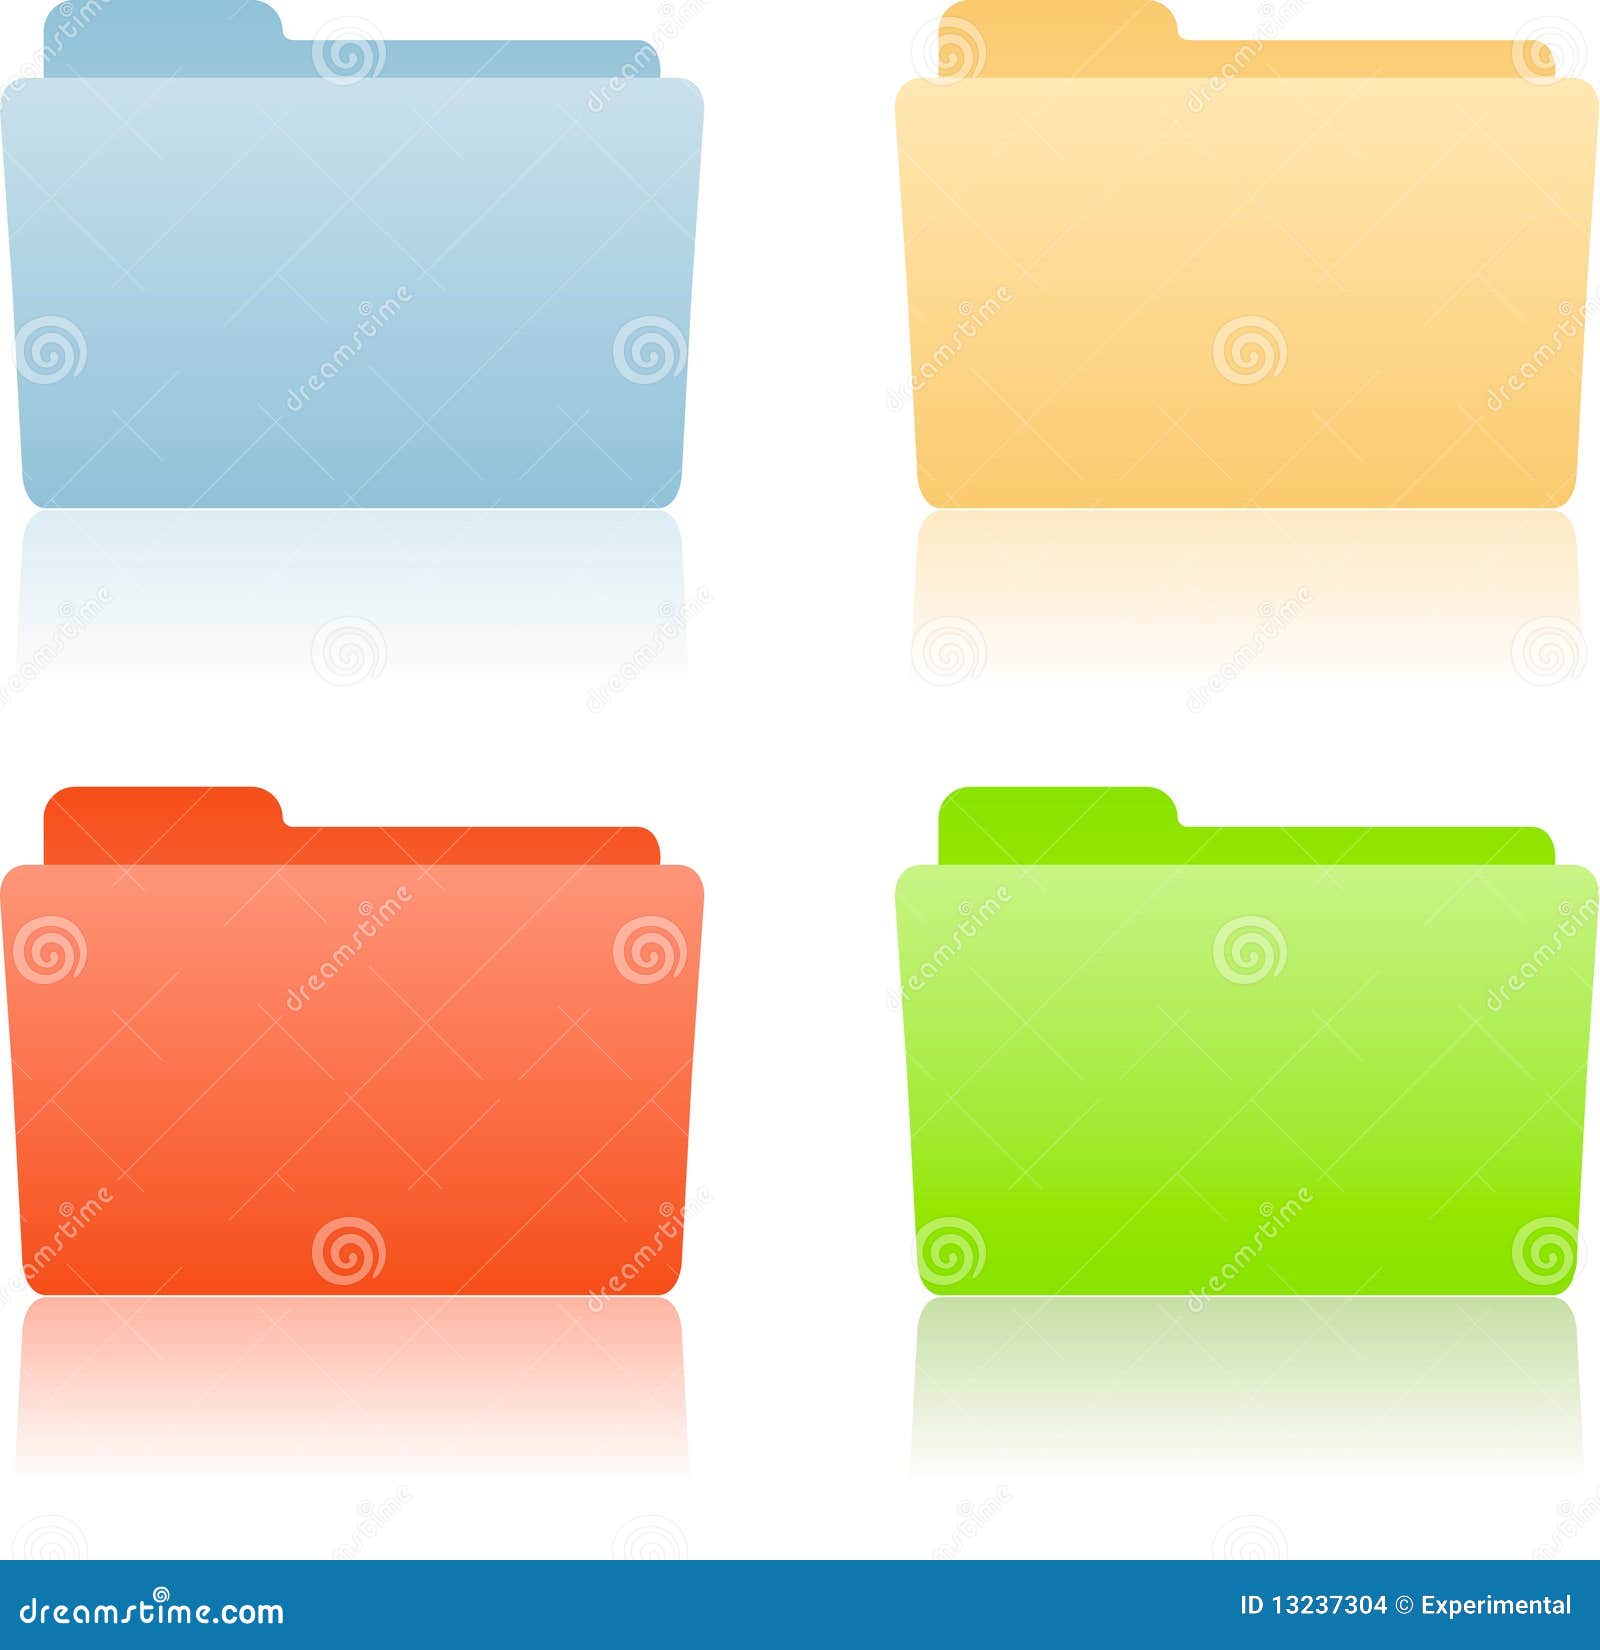 file folder with place for label